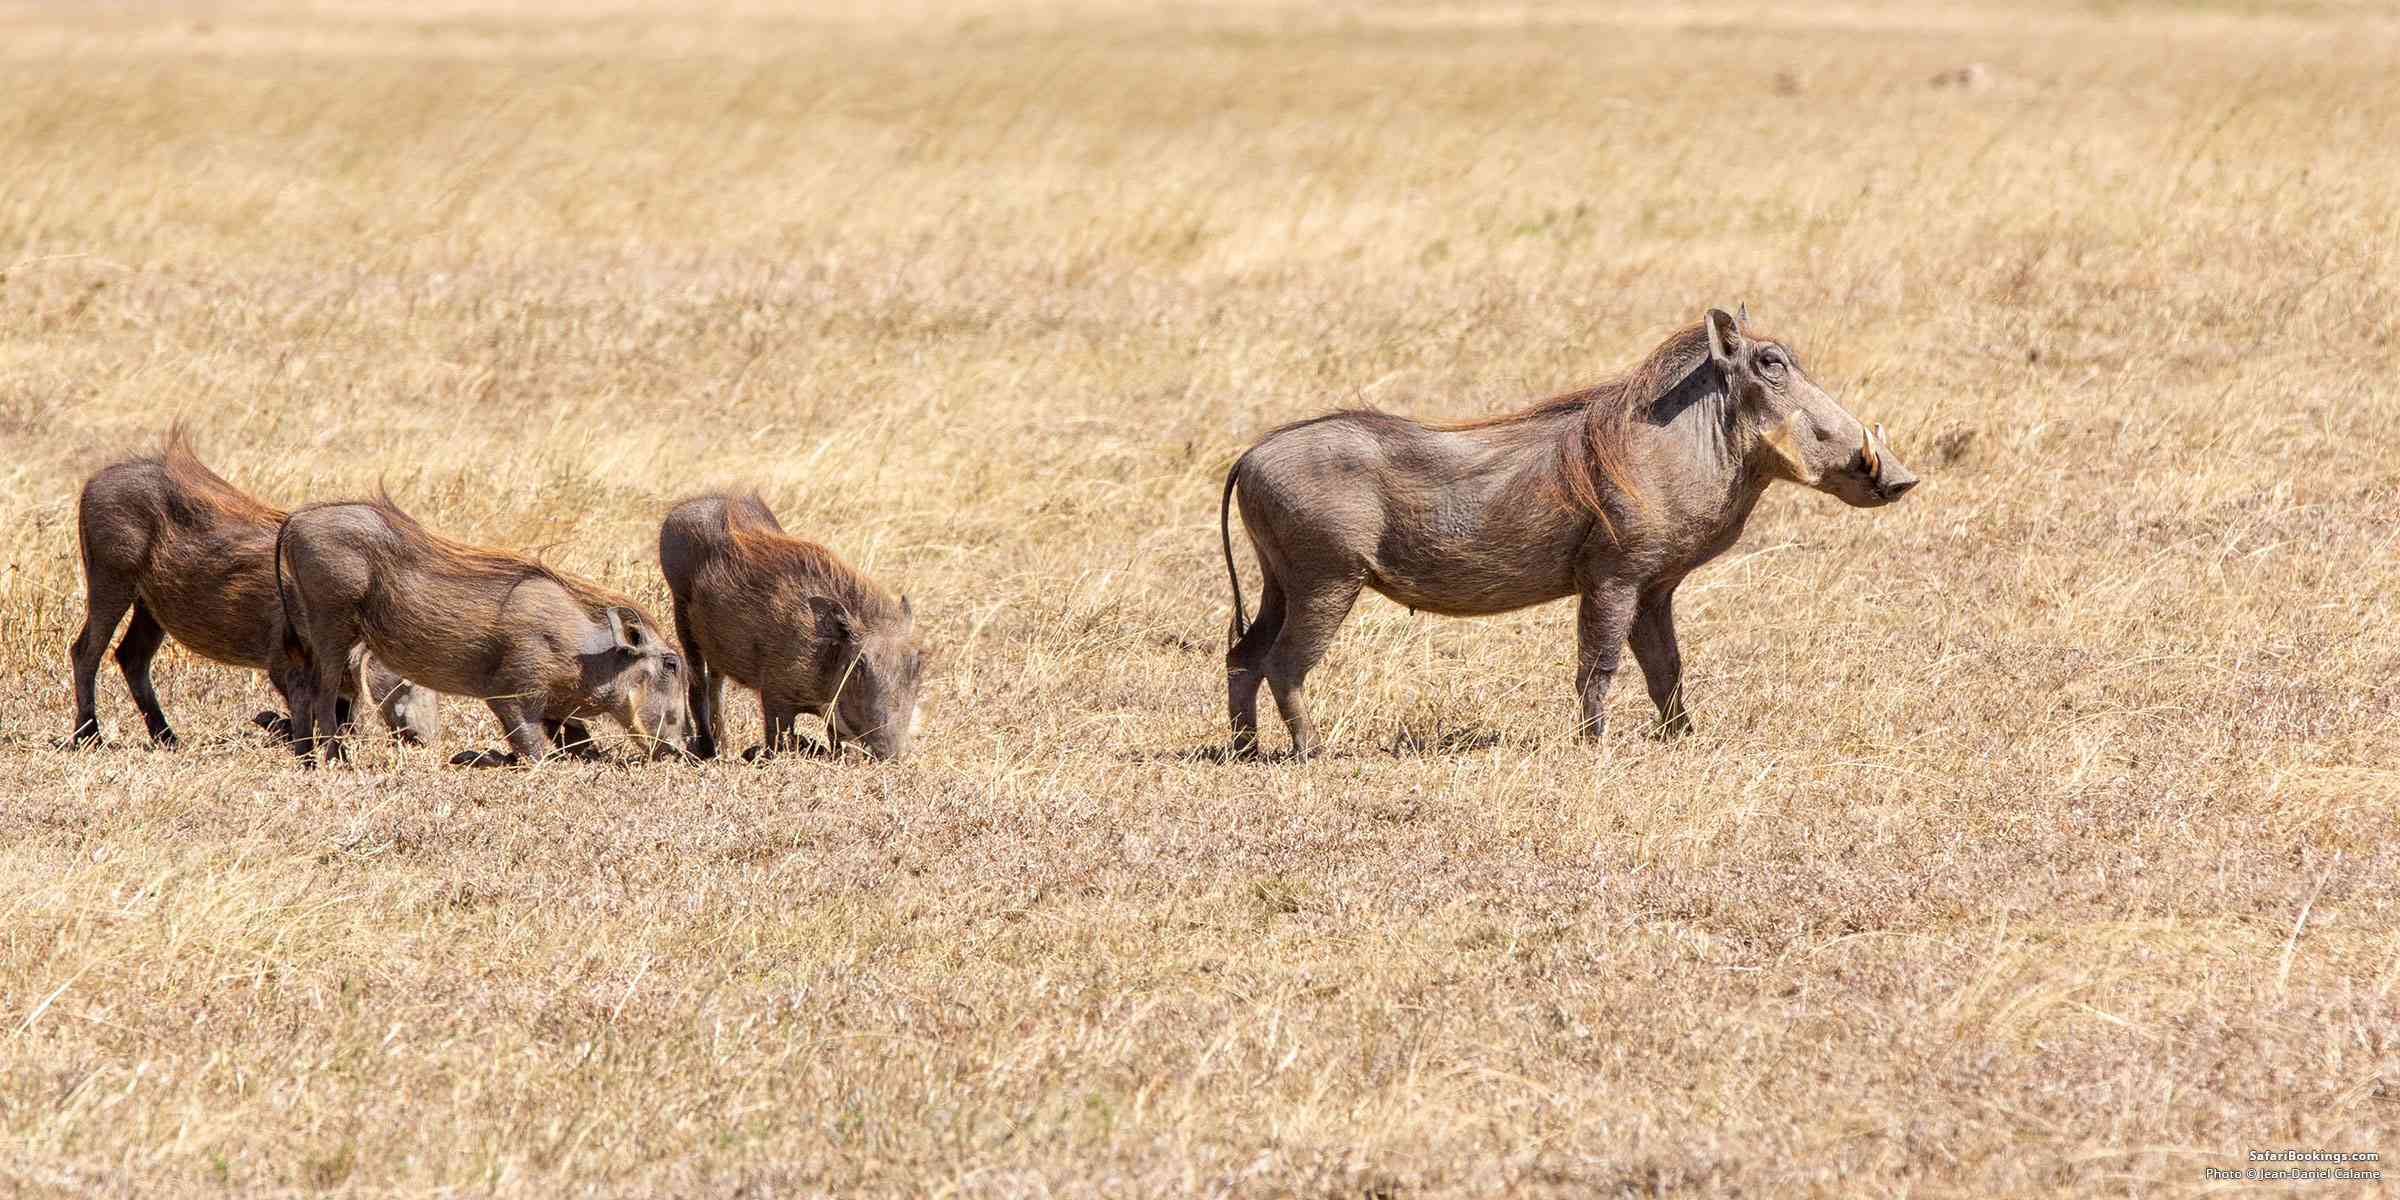 5 Fascinating Facts About the Incredible Warthog